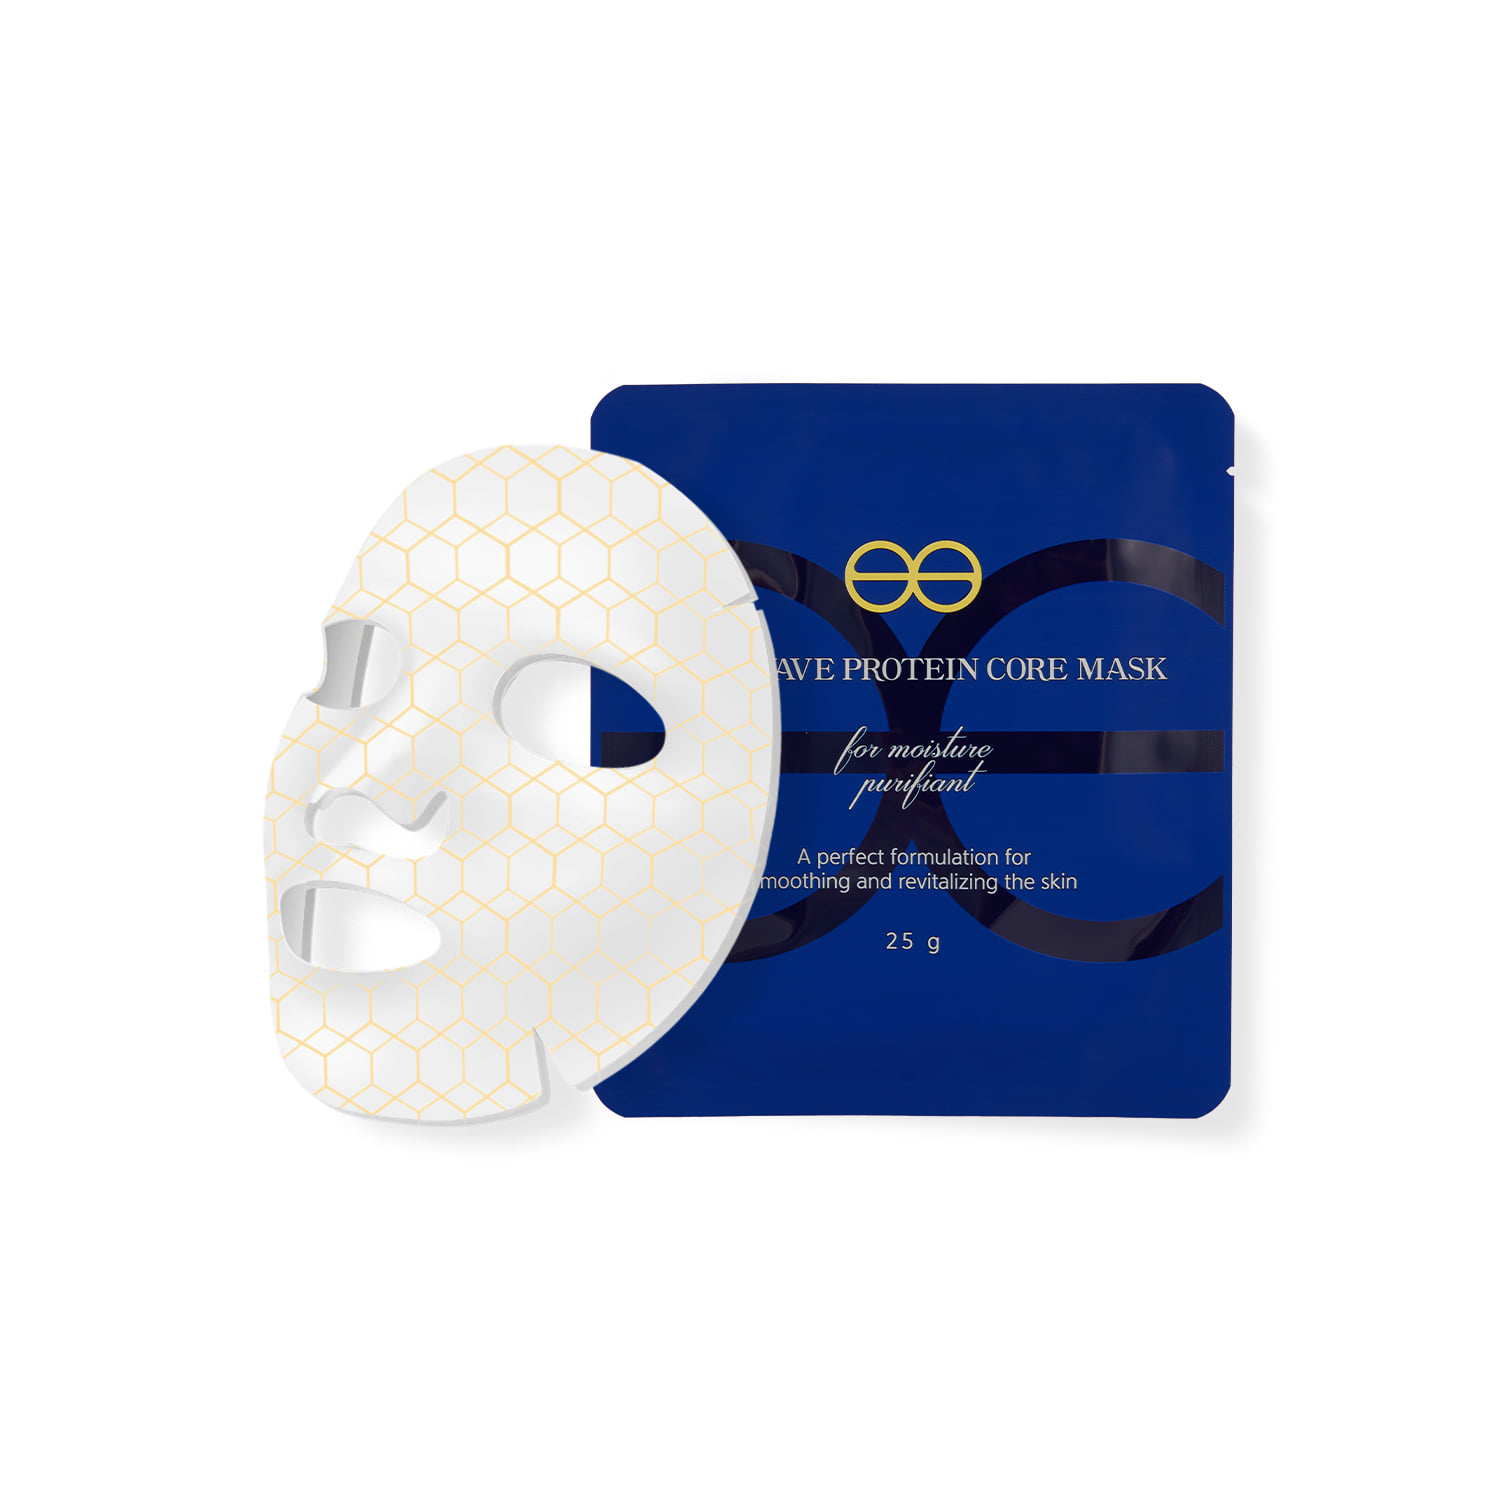 TWO WAVE PROTEIN CORE MASK